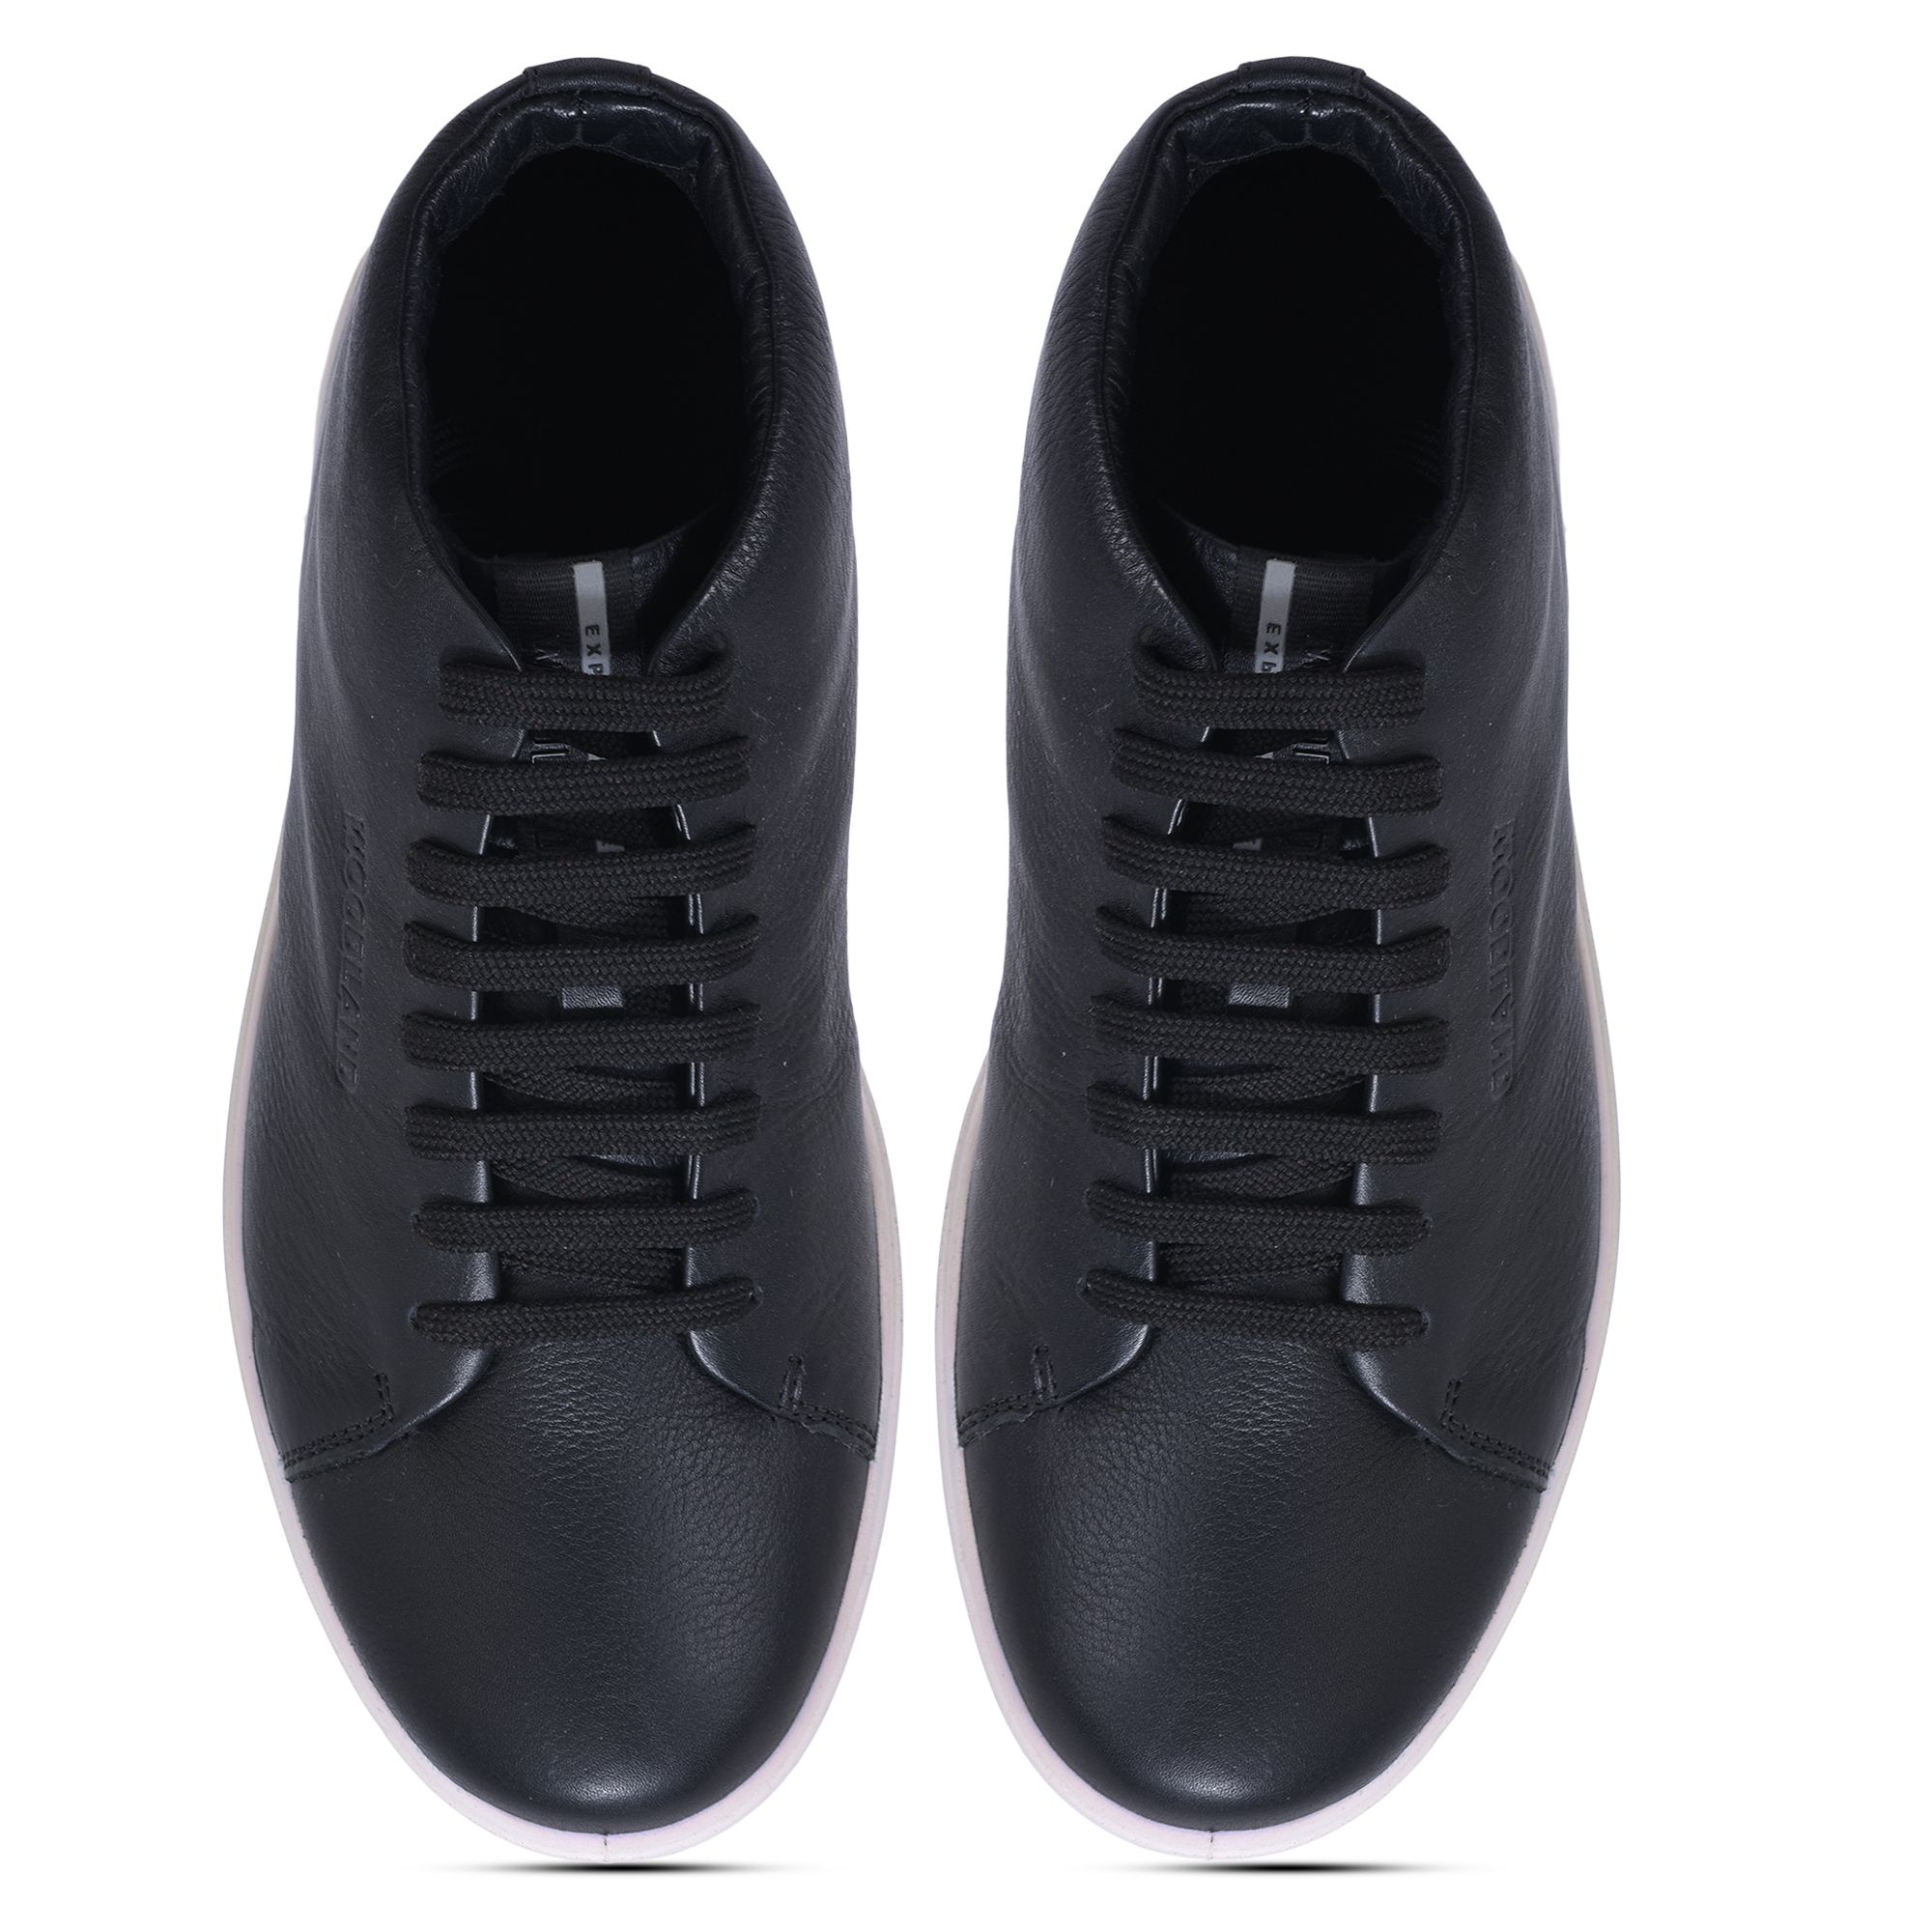 Woodland Black casual sneakers